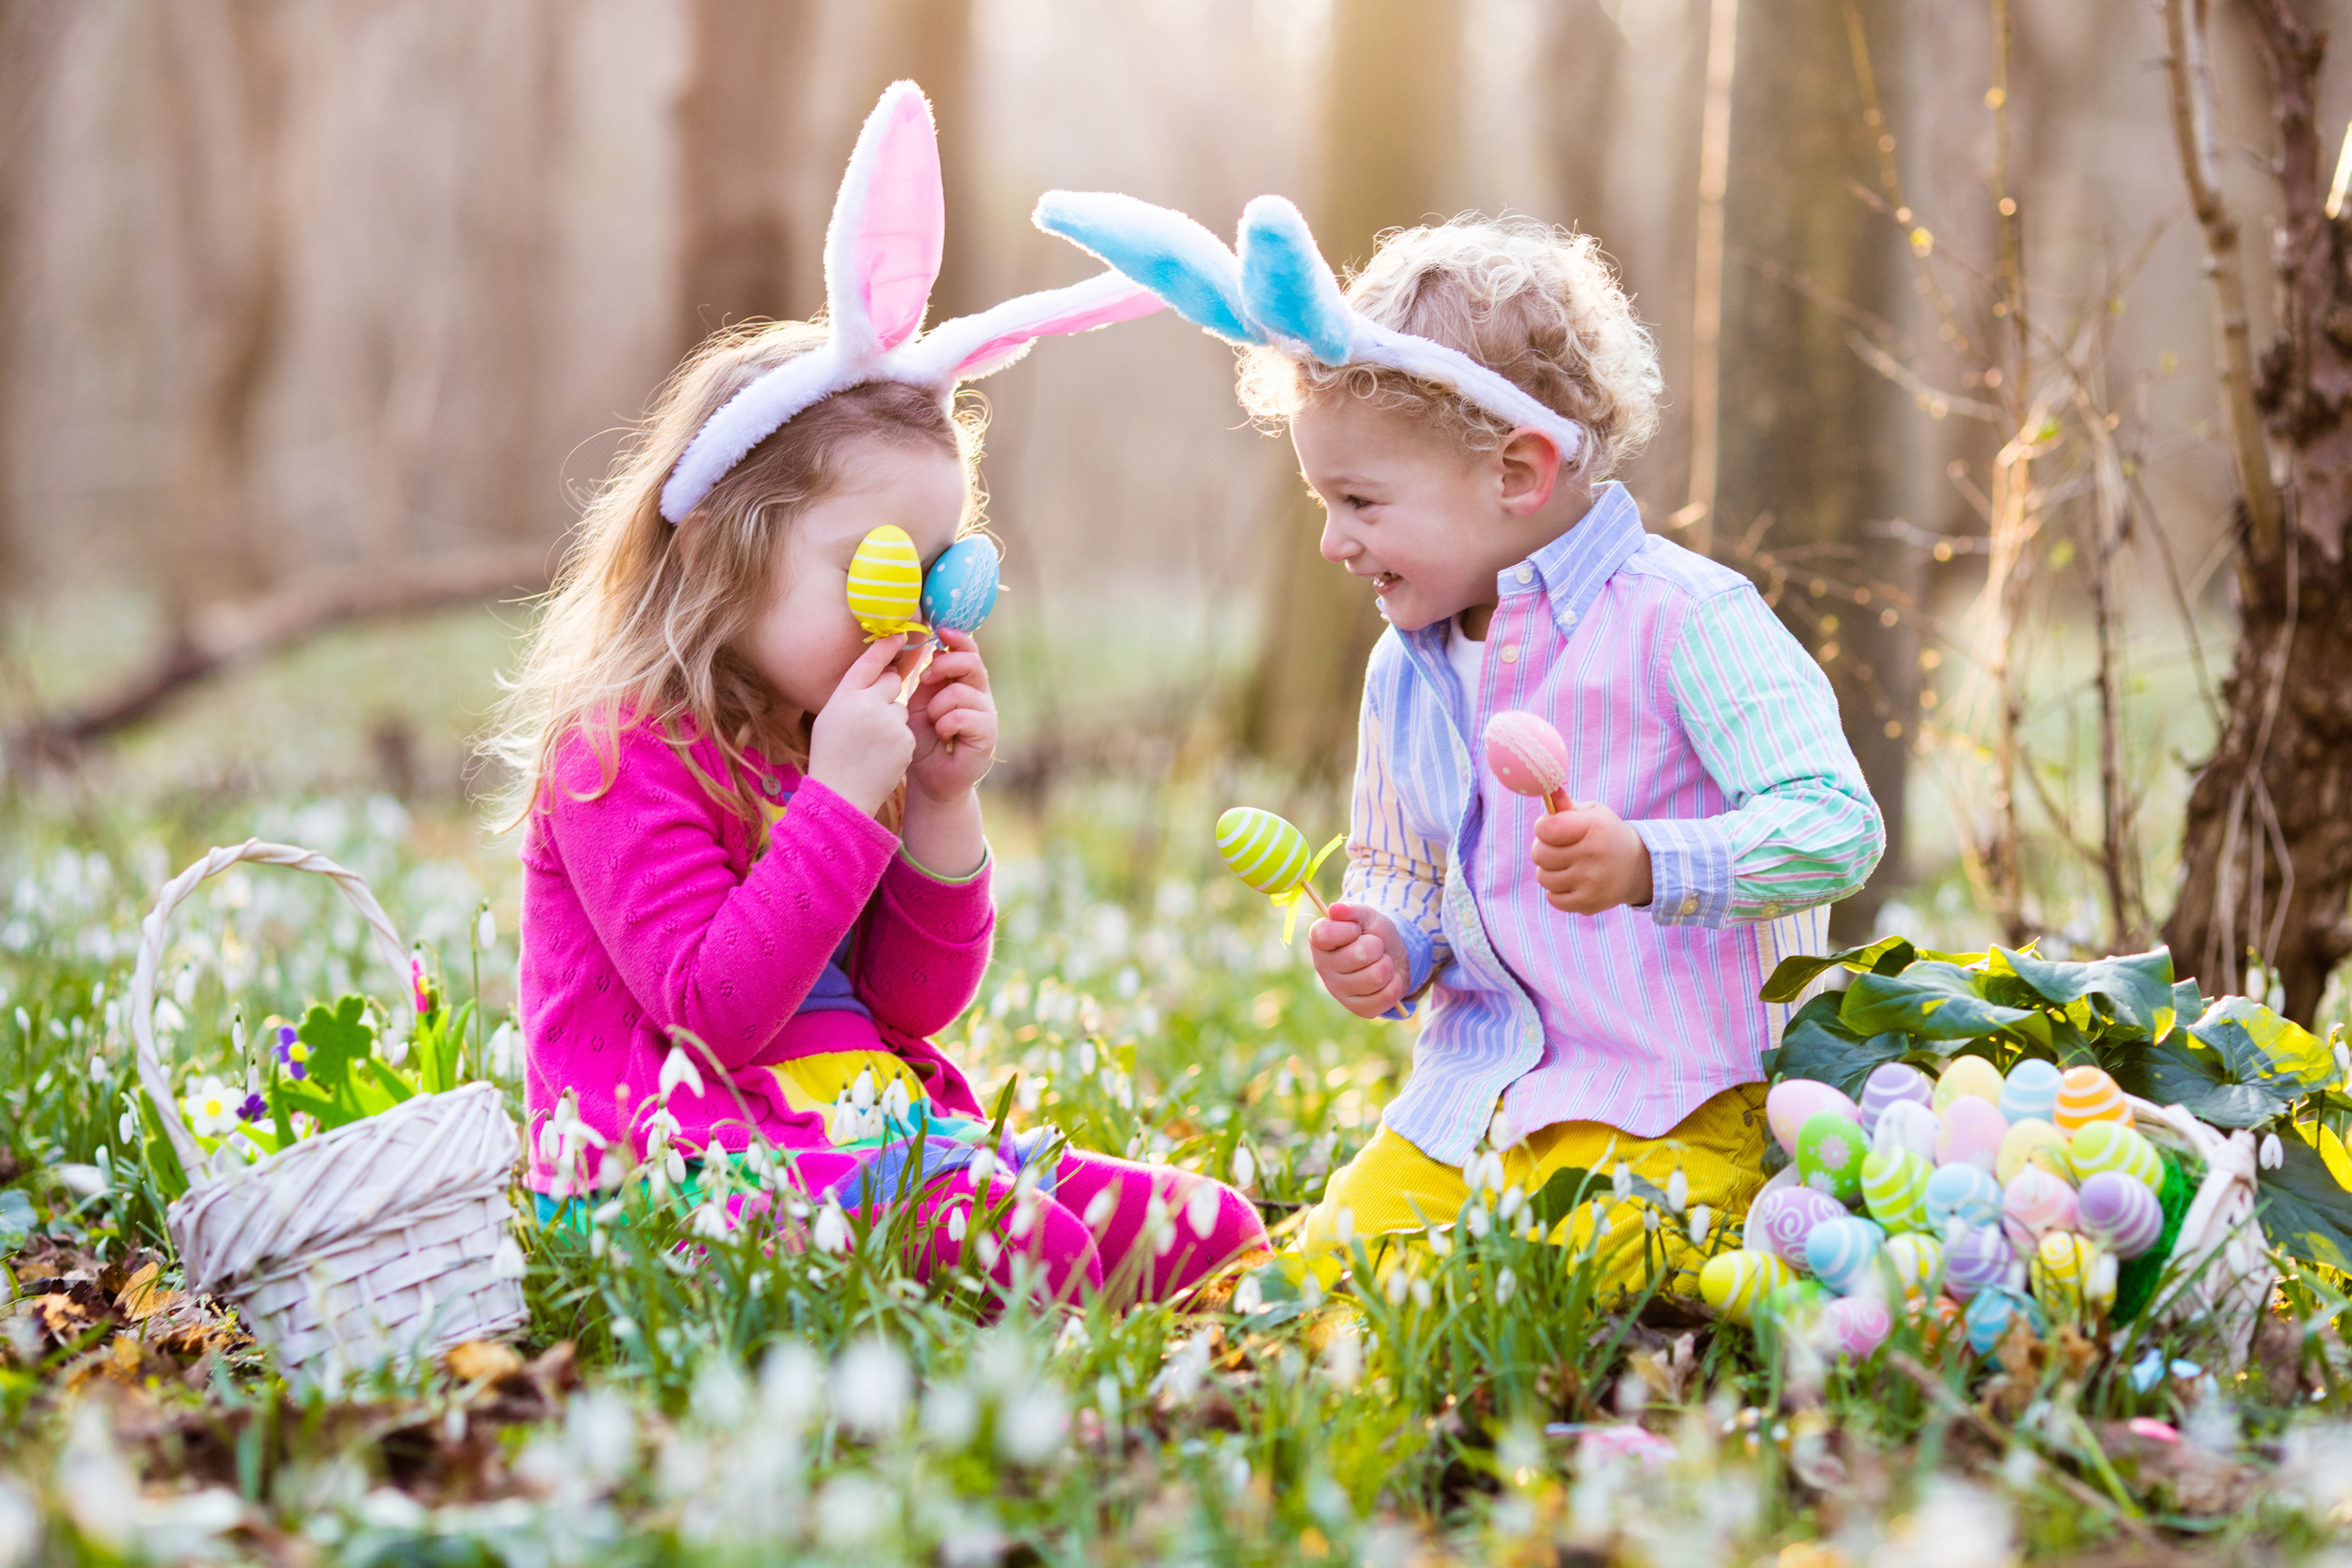 "Is it Okay to do Easter Egg Hunts for our Kids?" (The Patrick Madrid Show)